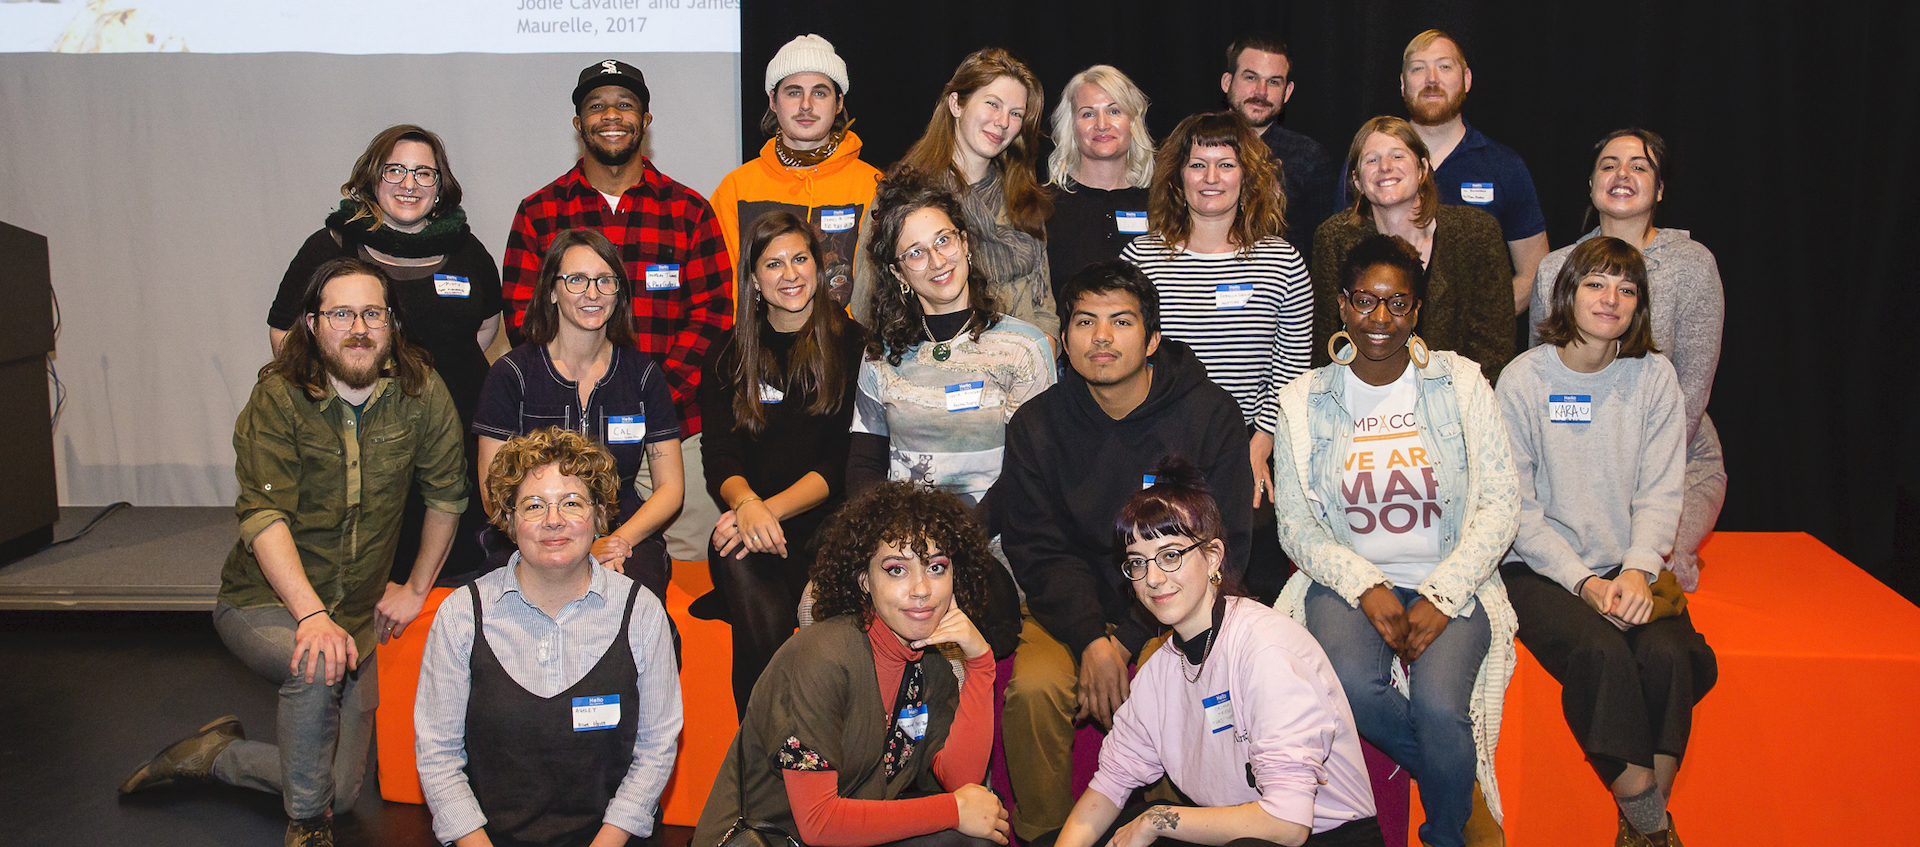 Representatives of current and past DIY artist spaces in Ohio pose together for a photo during the public event hear here: artist-run spaces and collectives in Ohio November 16, 2019 at the Wexner Center for the Arts 